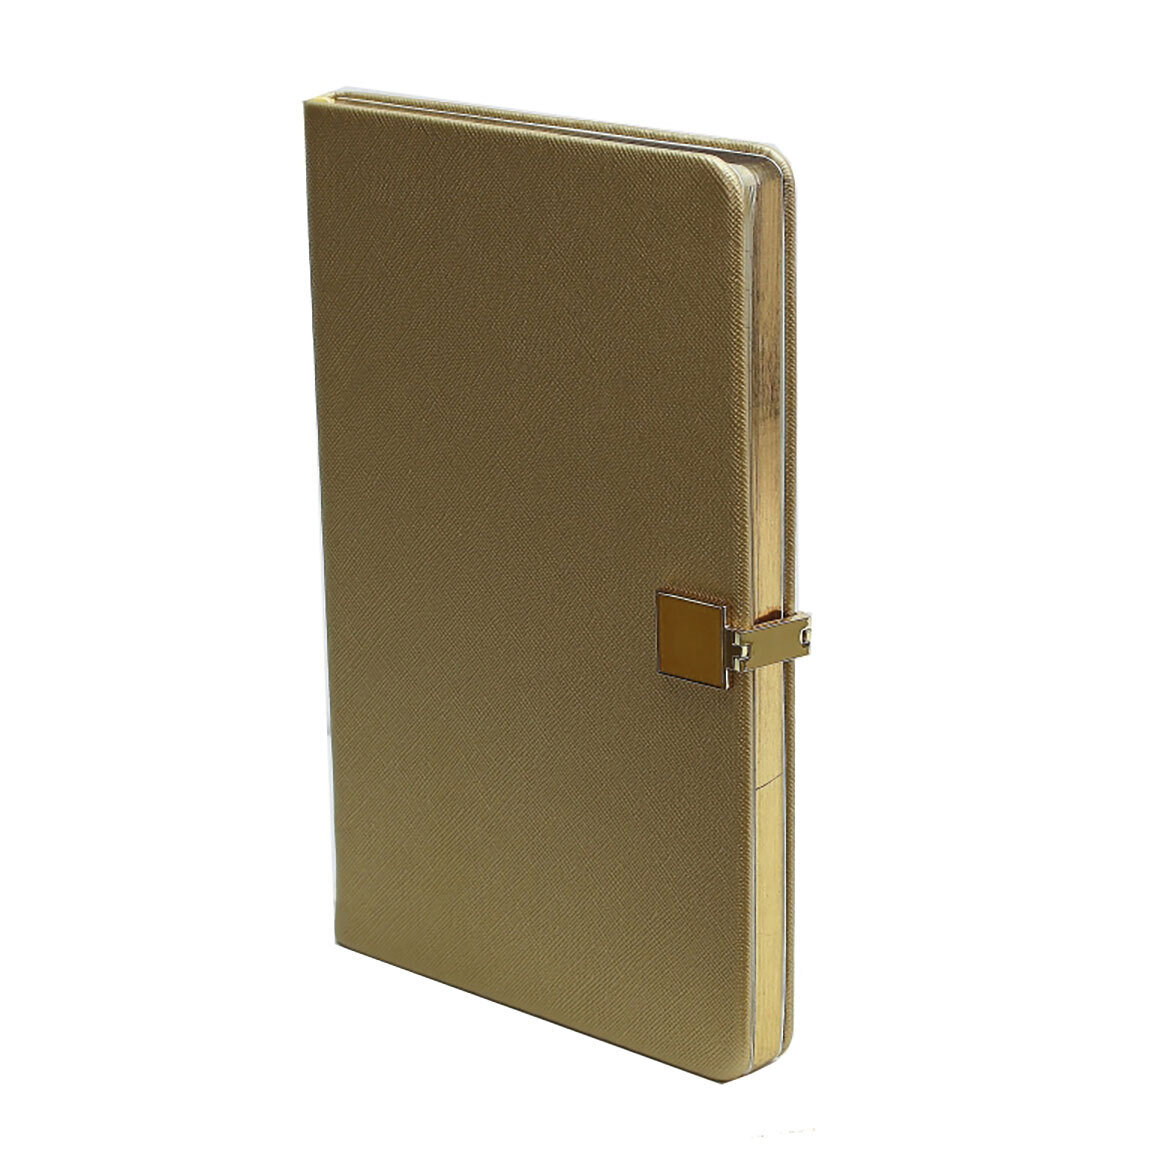 Addison Ross Gold & Gold A5 Notebook A5 Inch Pu Leather NB1007